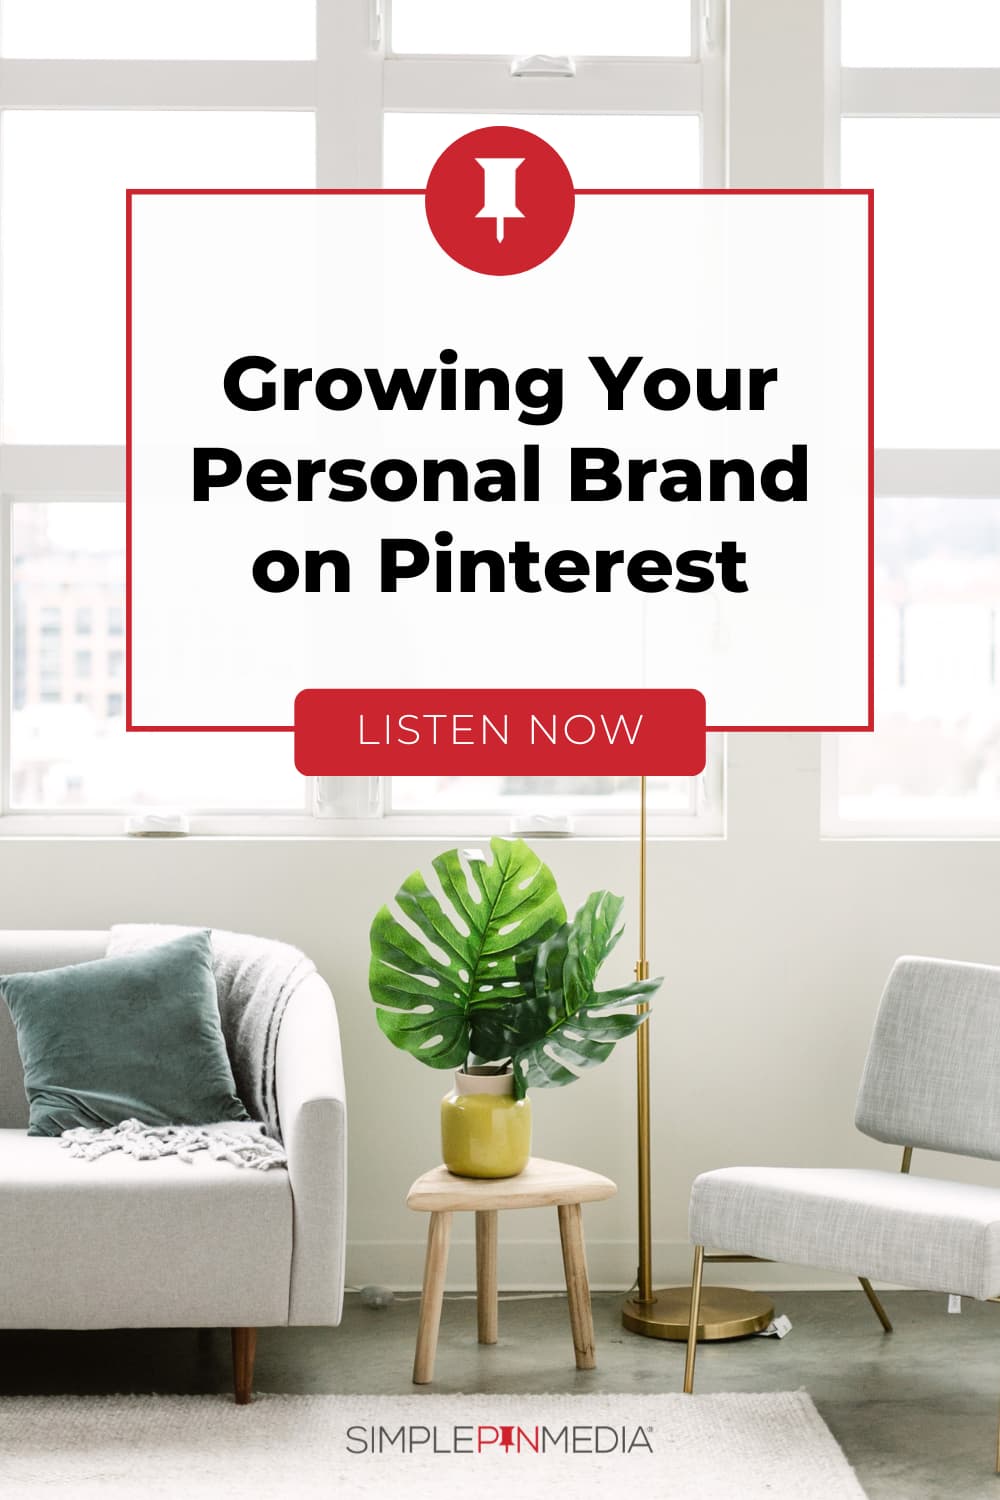 320 – How To Build a Personal Brand